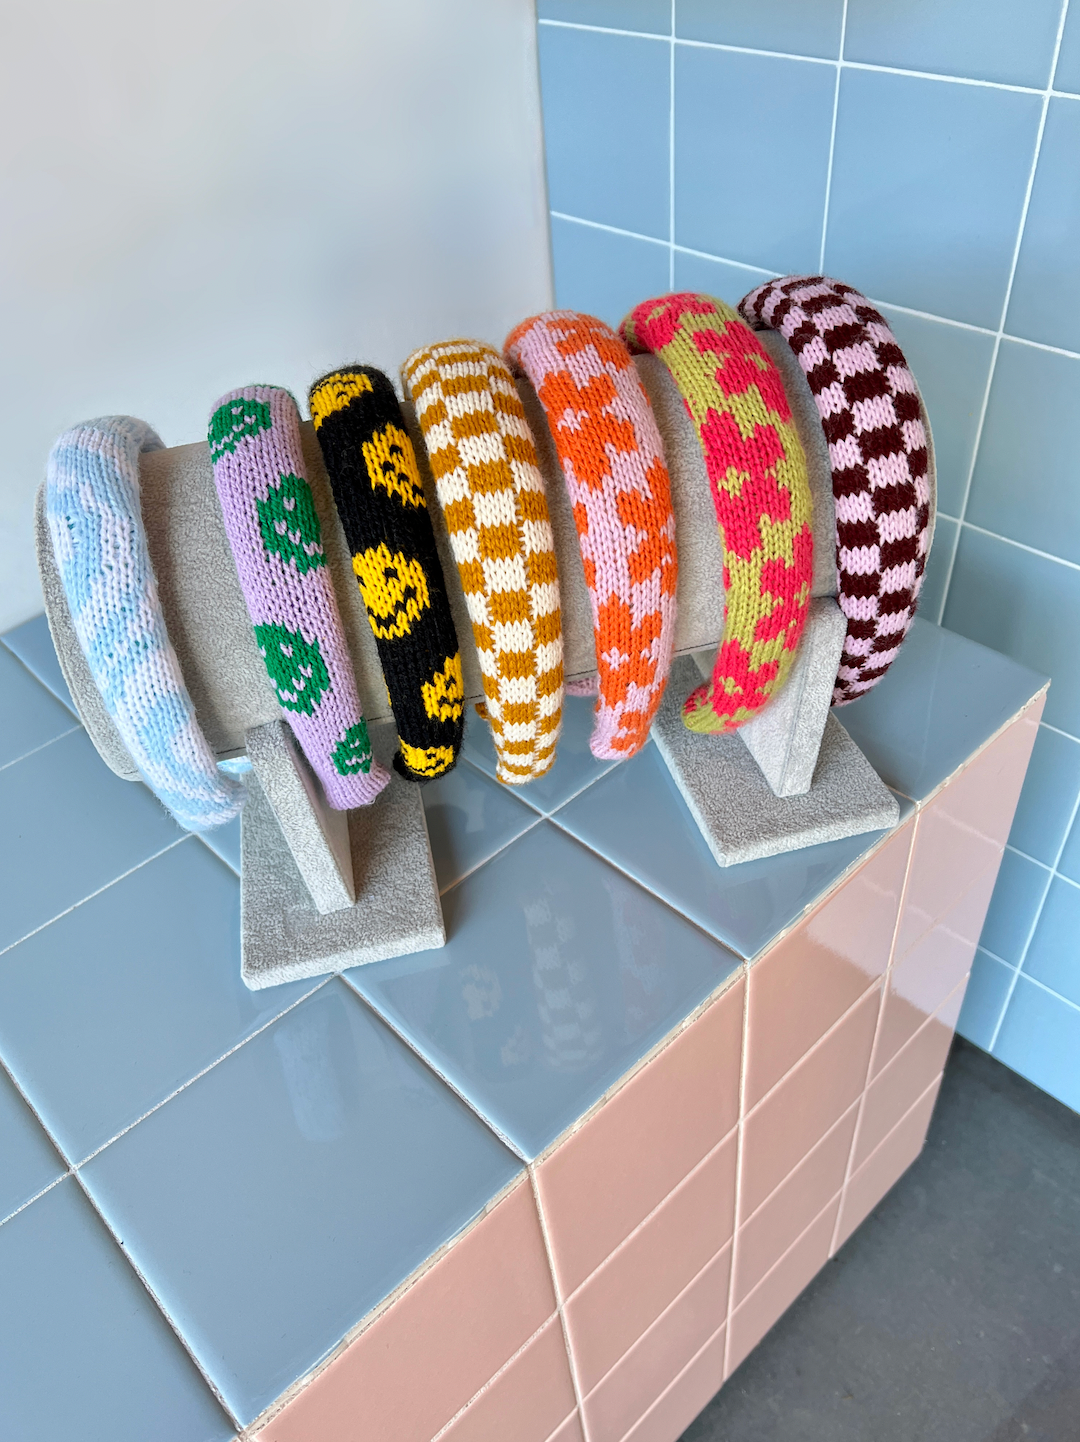 A dissplay of kids' knitted headbands in various colors and patterns